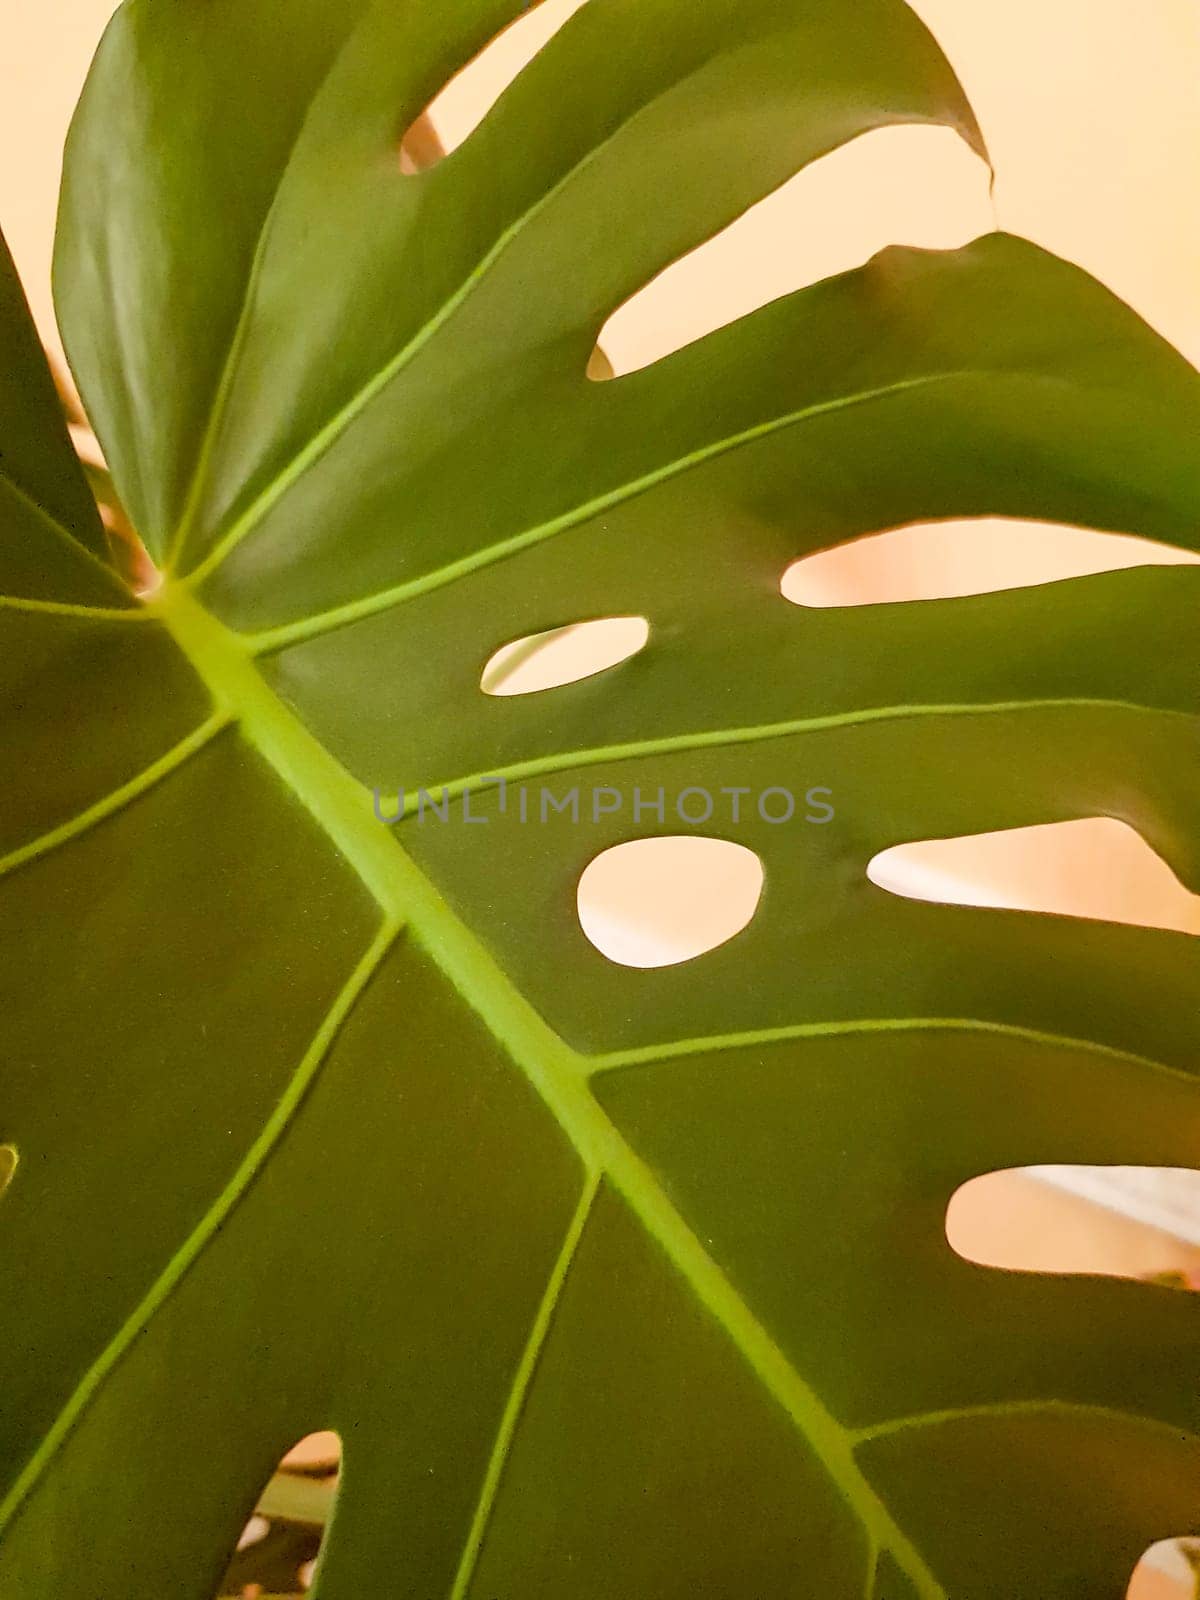 Monstera leaf close-up on a yellow background, vertical.